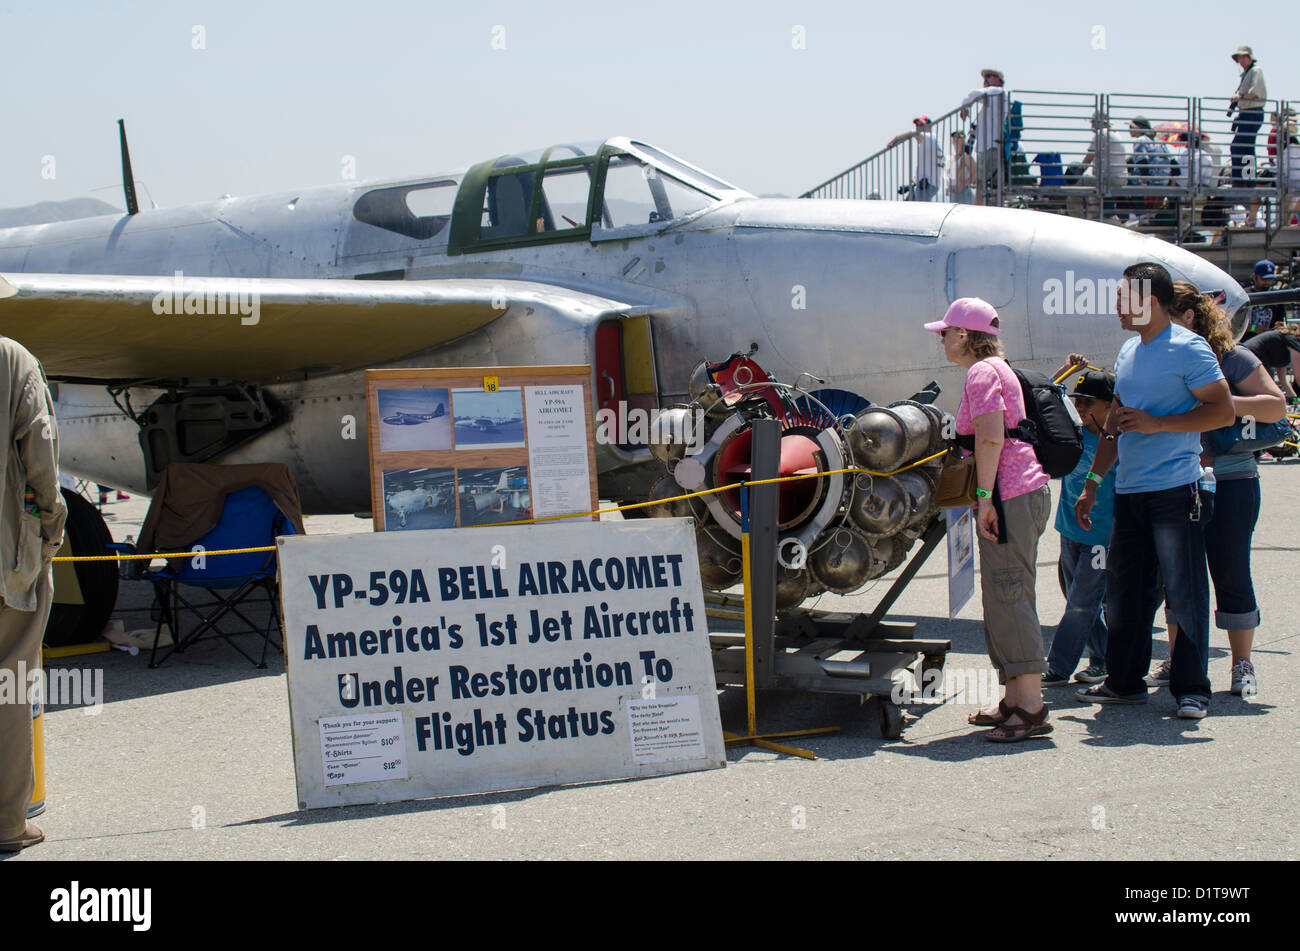 A display at the Planes of Fame Air Museum, during the Chino Air Show